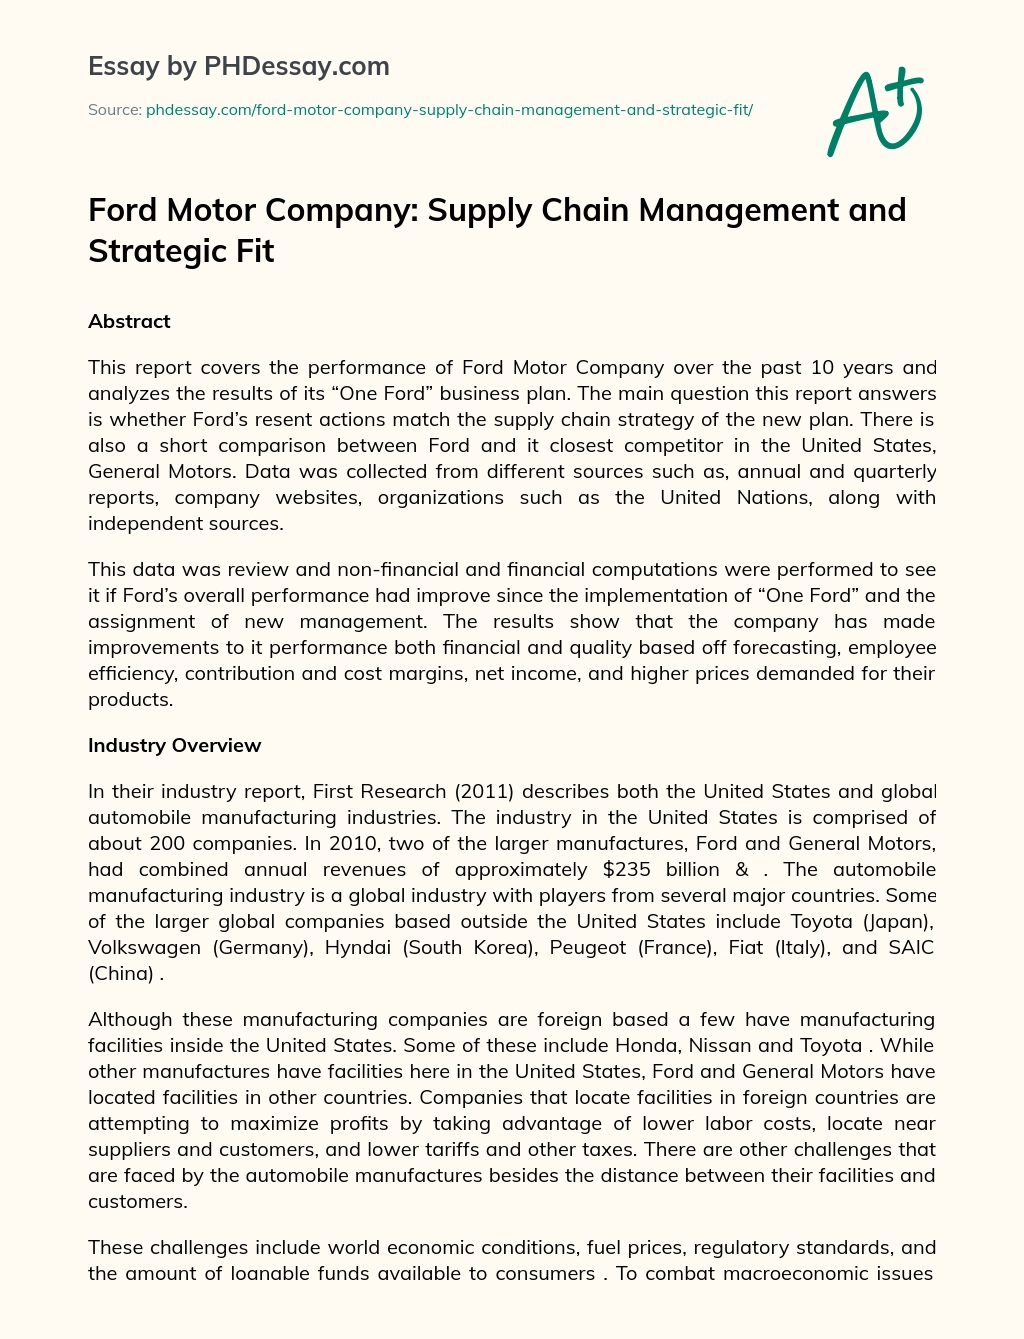 Ford Motor Company: Supply Chain Management and Strategic Fit essay